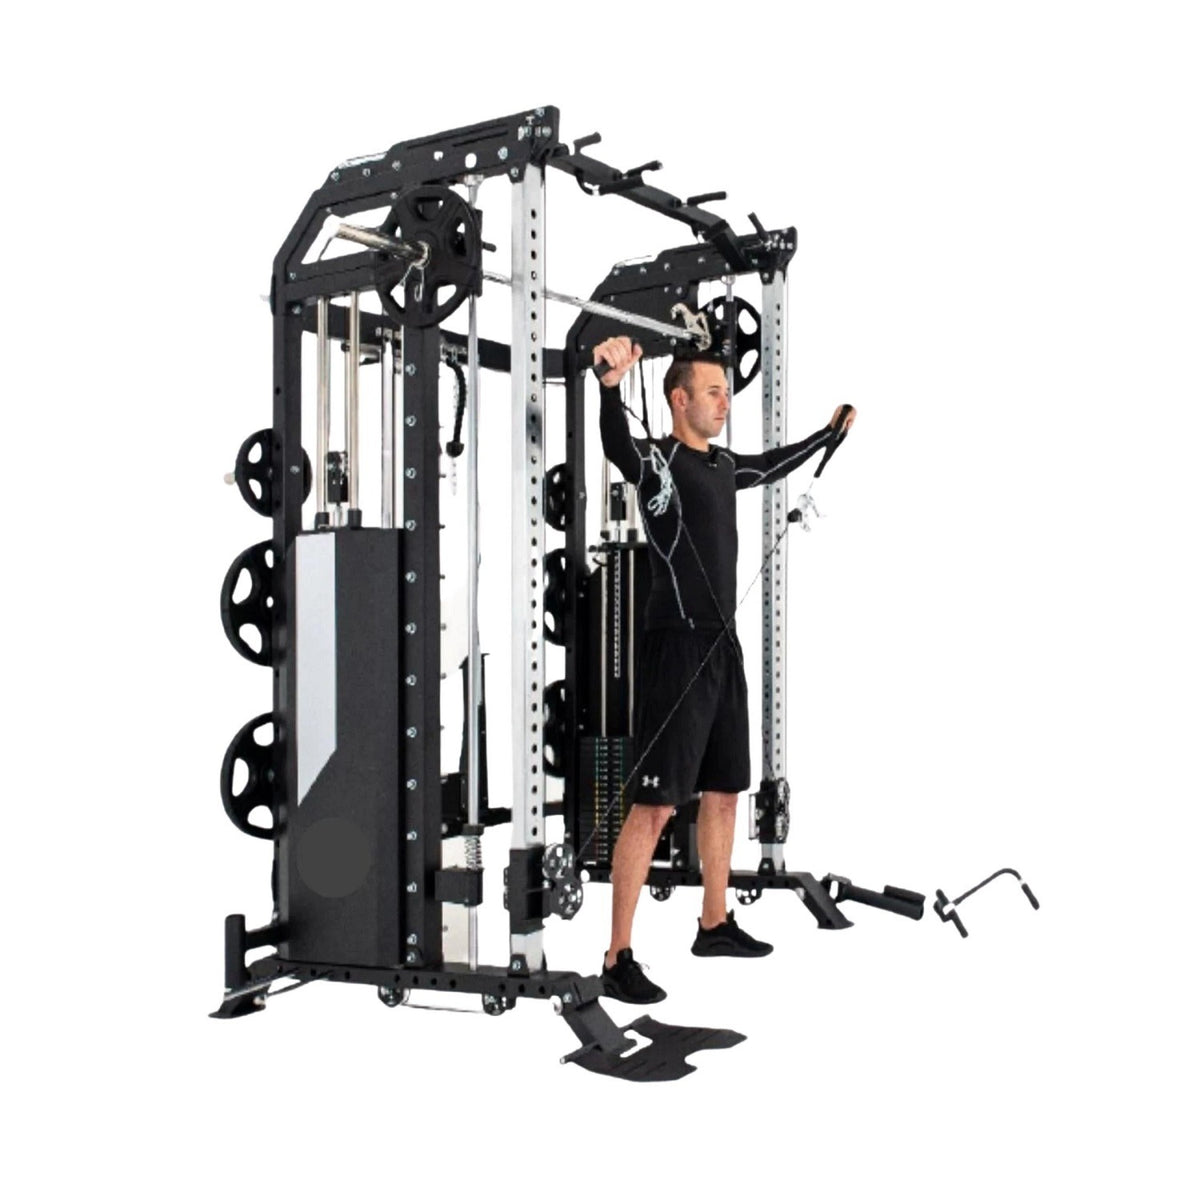 Rapid Motion Commercial 3-In-1 Smith Machine, Power Rack and Functional Trainer - Cardio Online